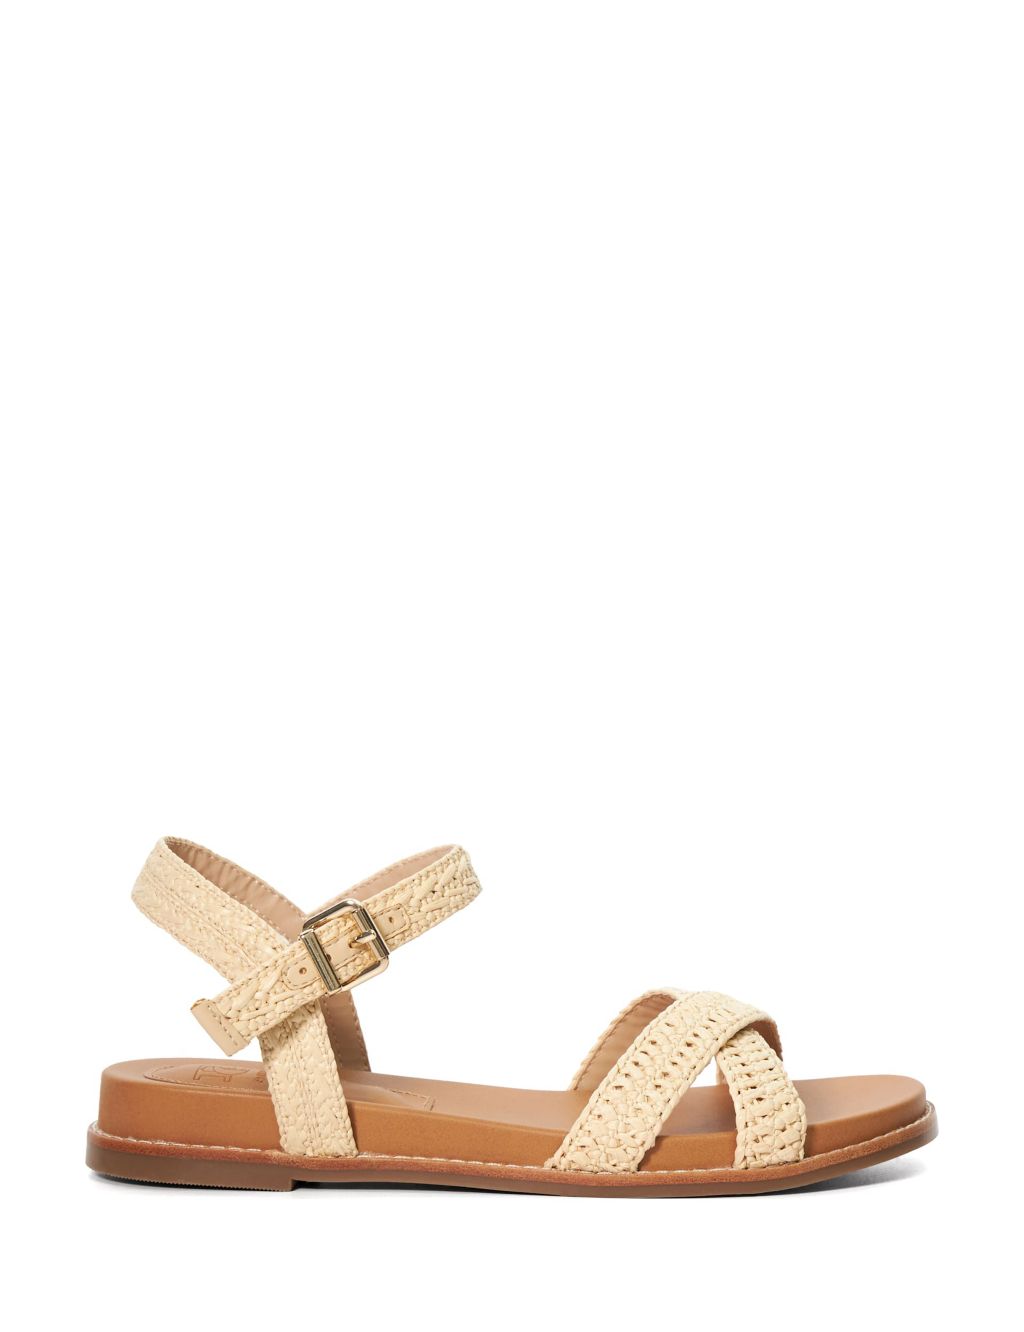 Woven Crossover Ankle Strap Flat Sandals | Dune London | M&S